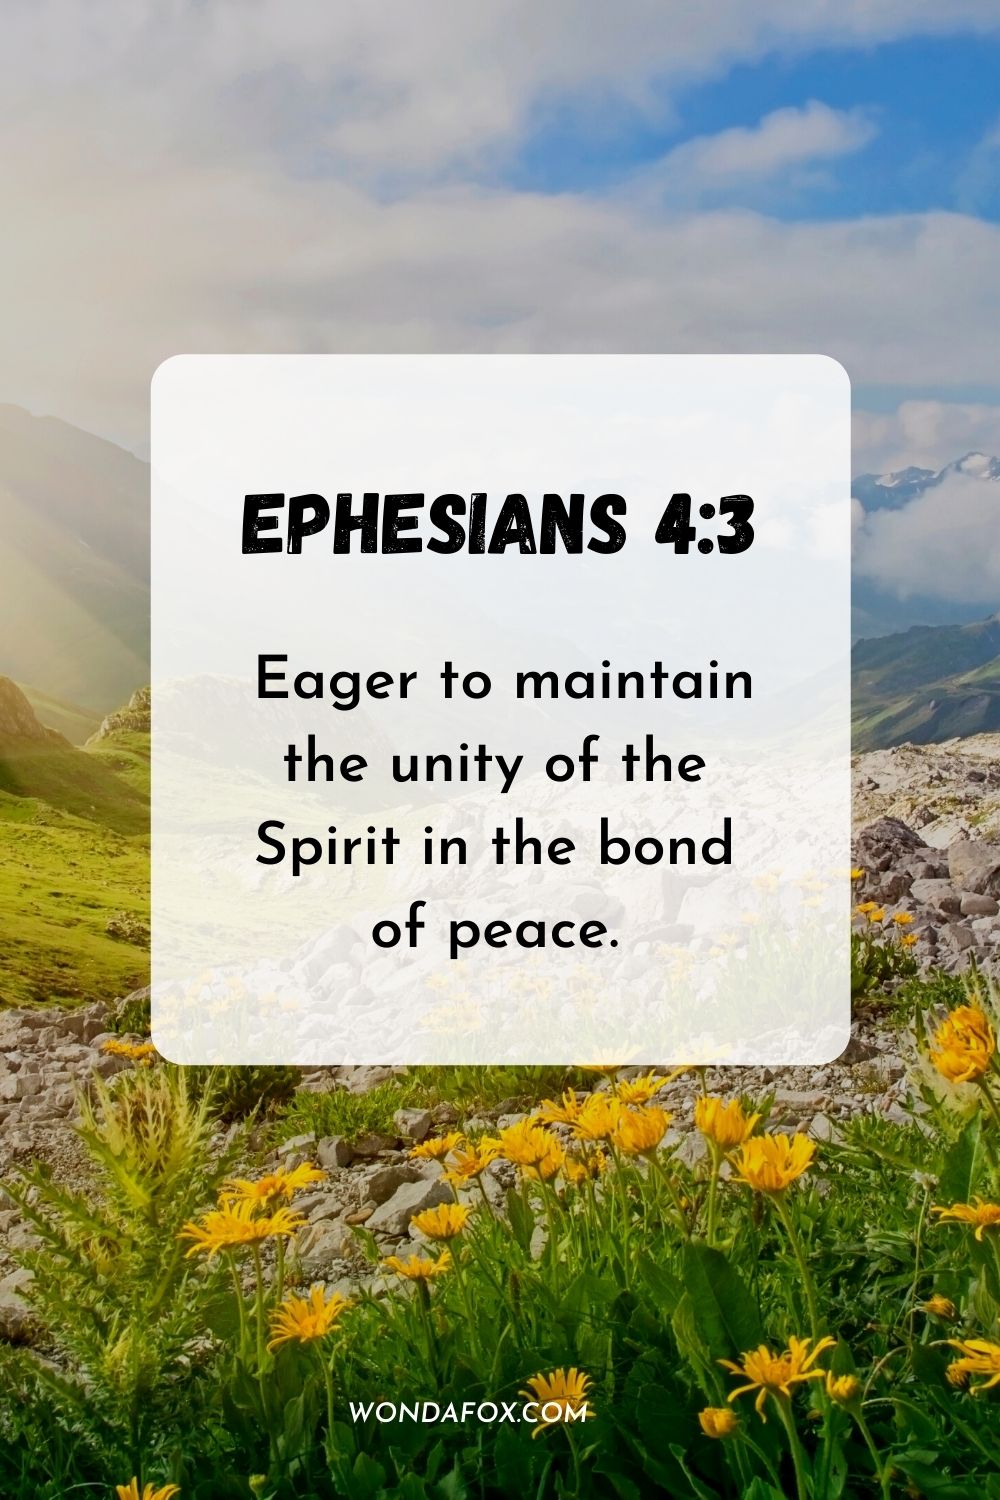  Eager to maintain the unity of the Spirit in the bond of peace. Ephesians 4:3